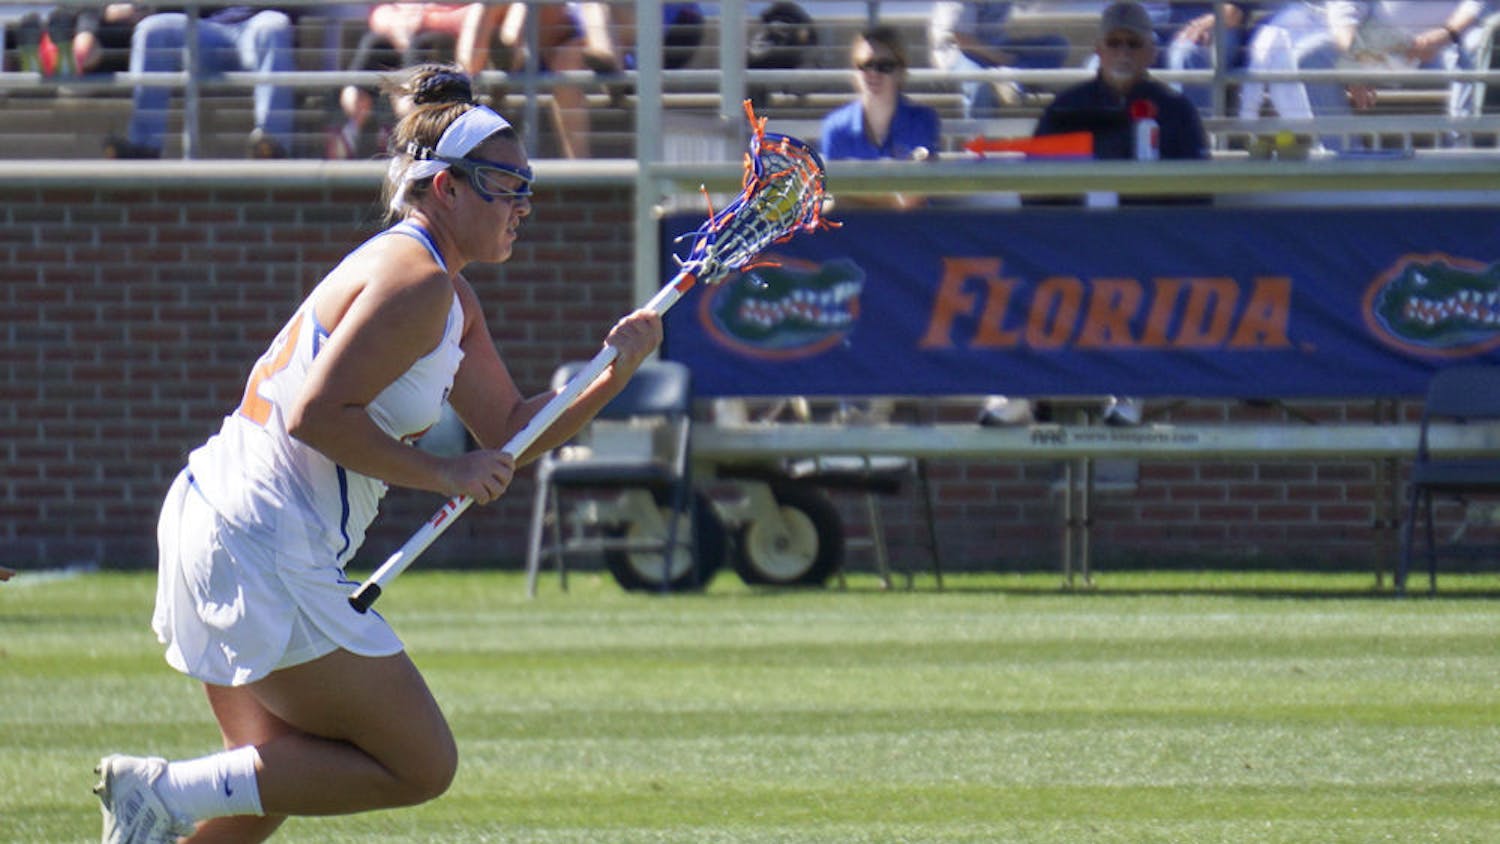 Senior Taylor Bresnahan scored a hat trick for Florida in a dominant, 14-7 victory over Lousiville.